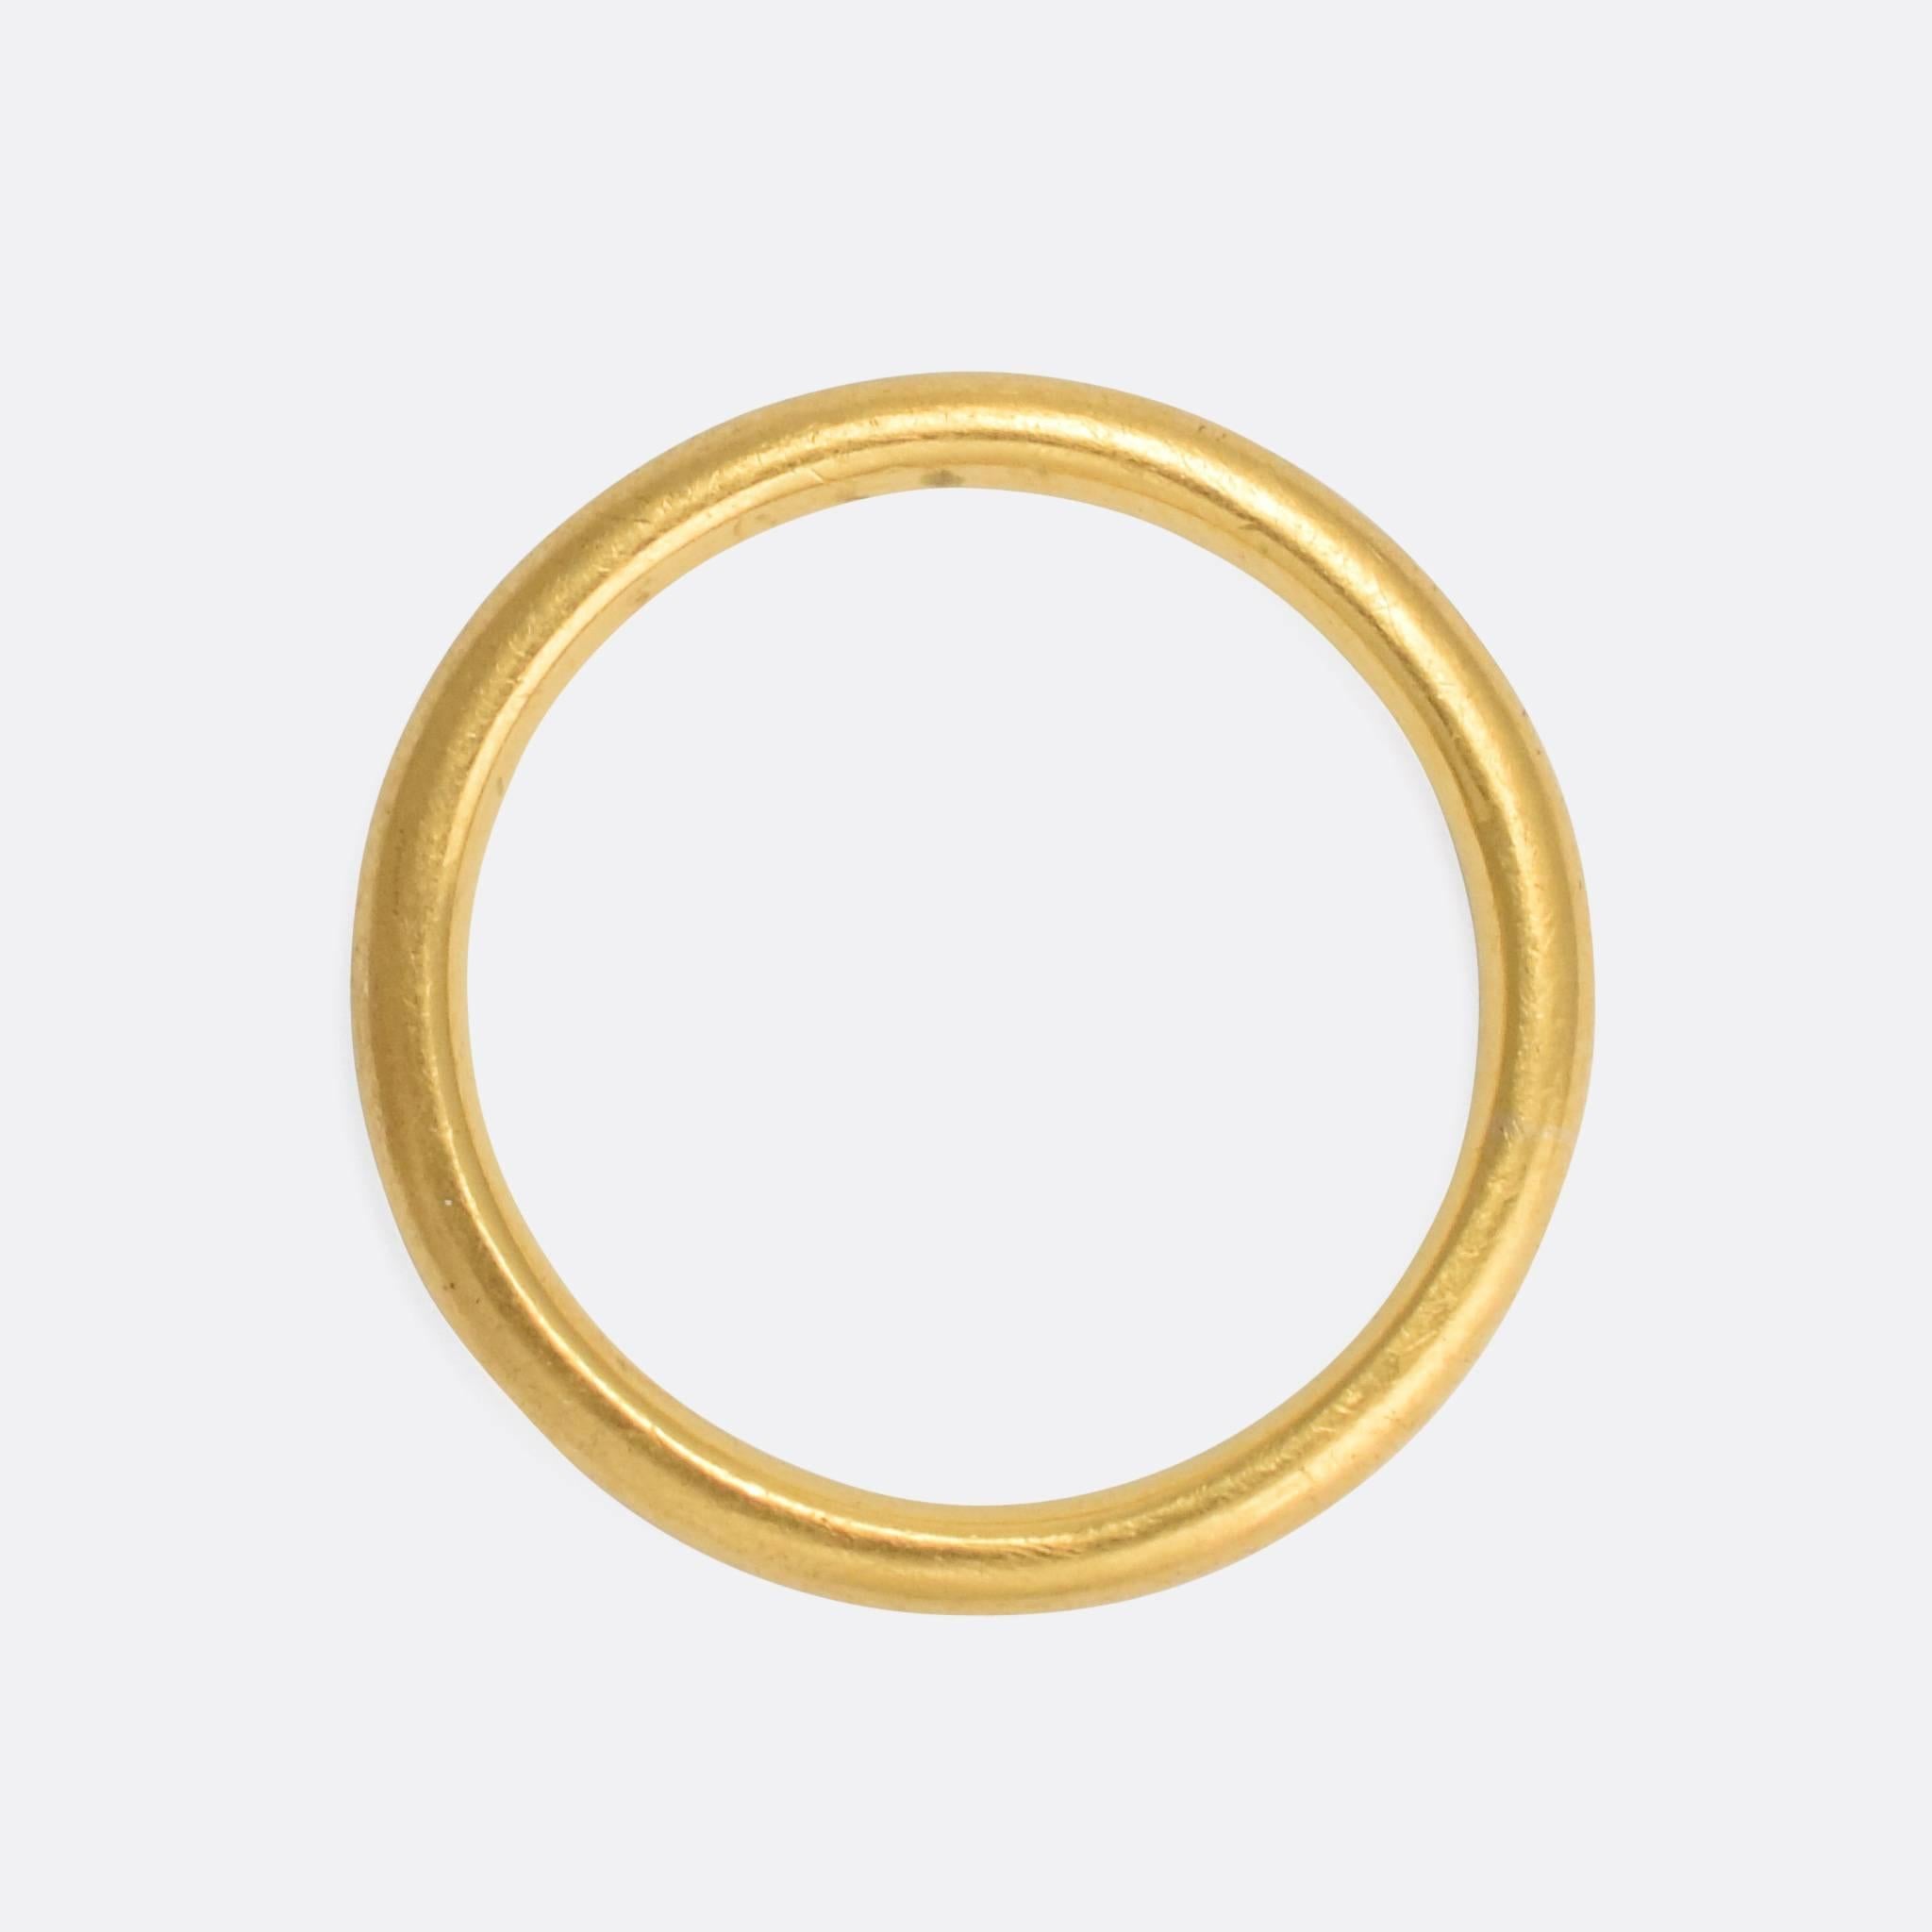 A fine quality antique wedding band, modelled in 18 karat yellow gold. It dates to the late 19th Century, crafted by hand with a round 